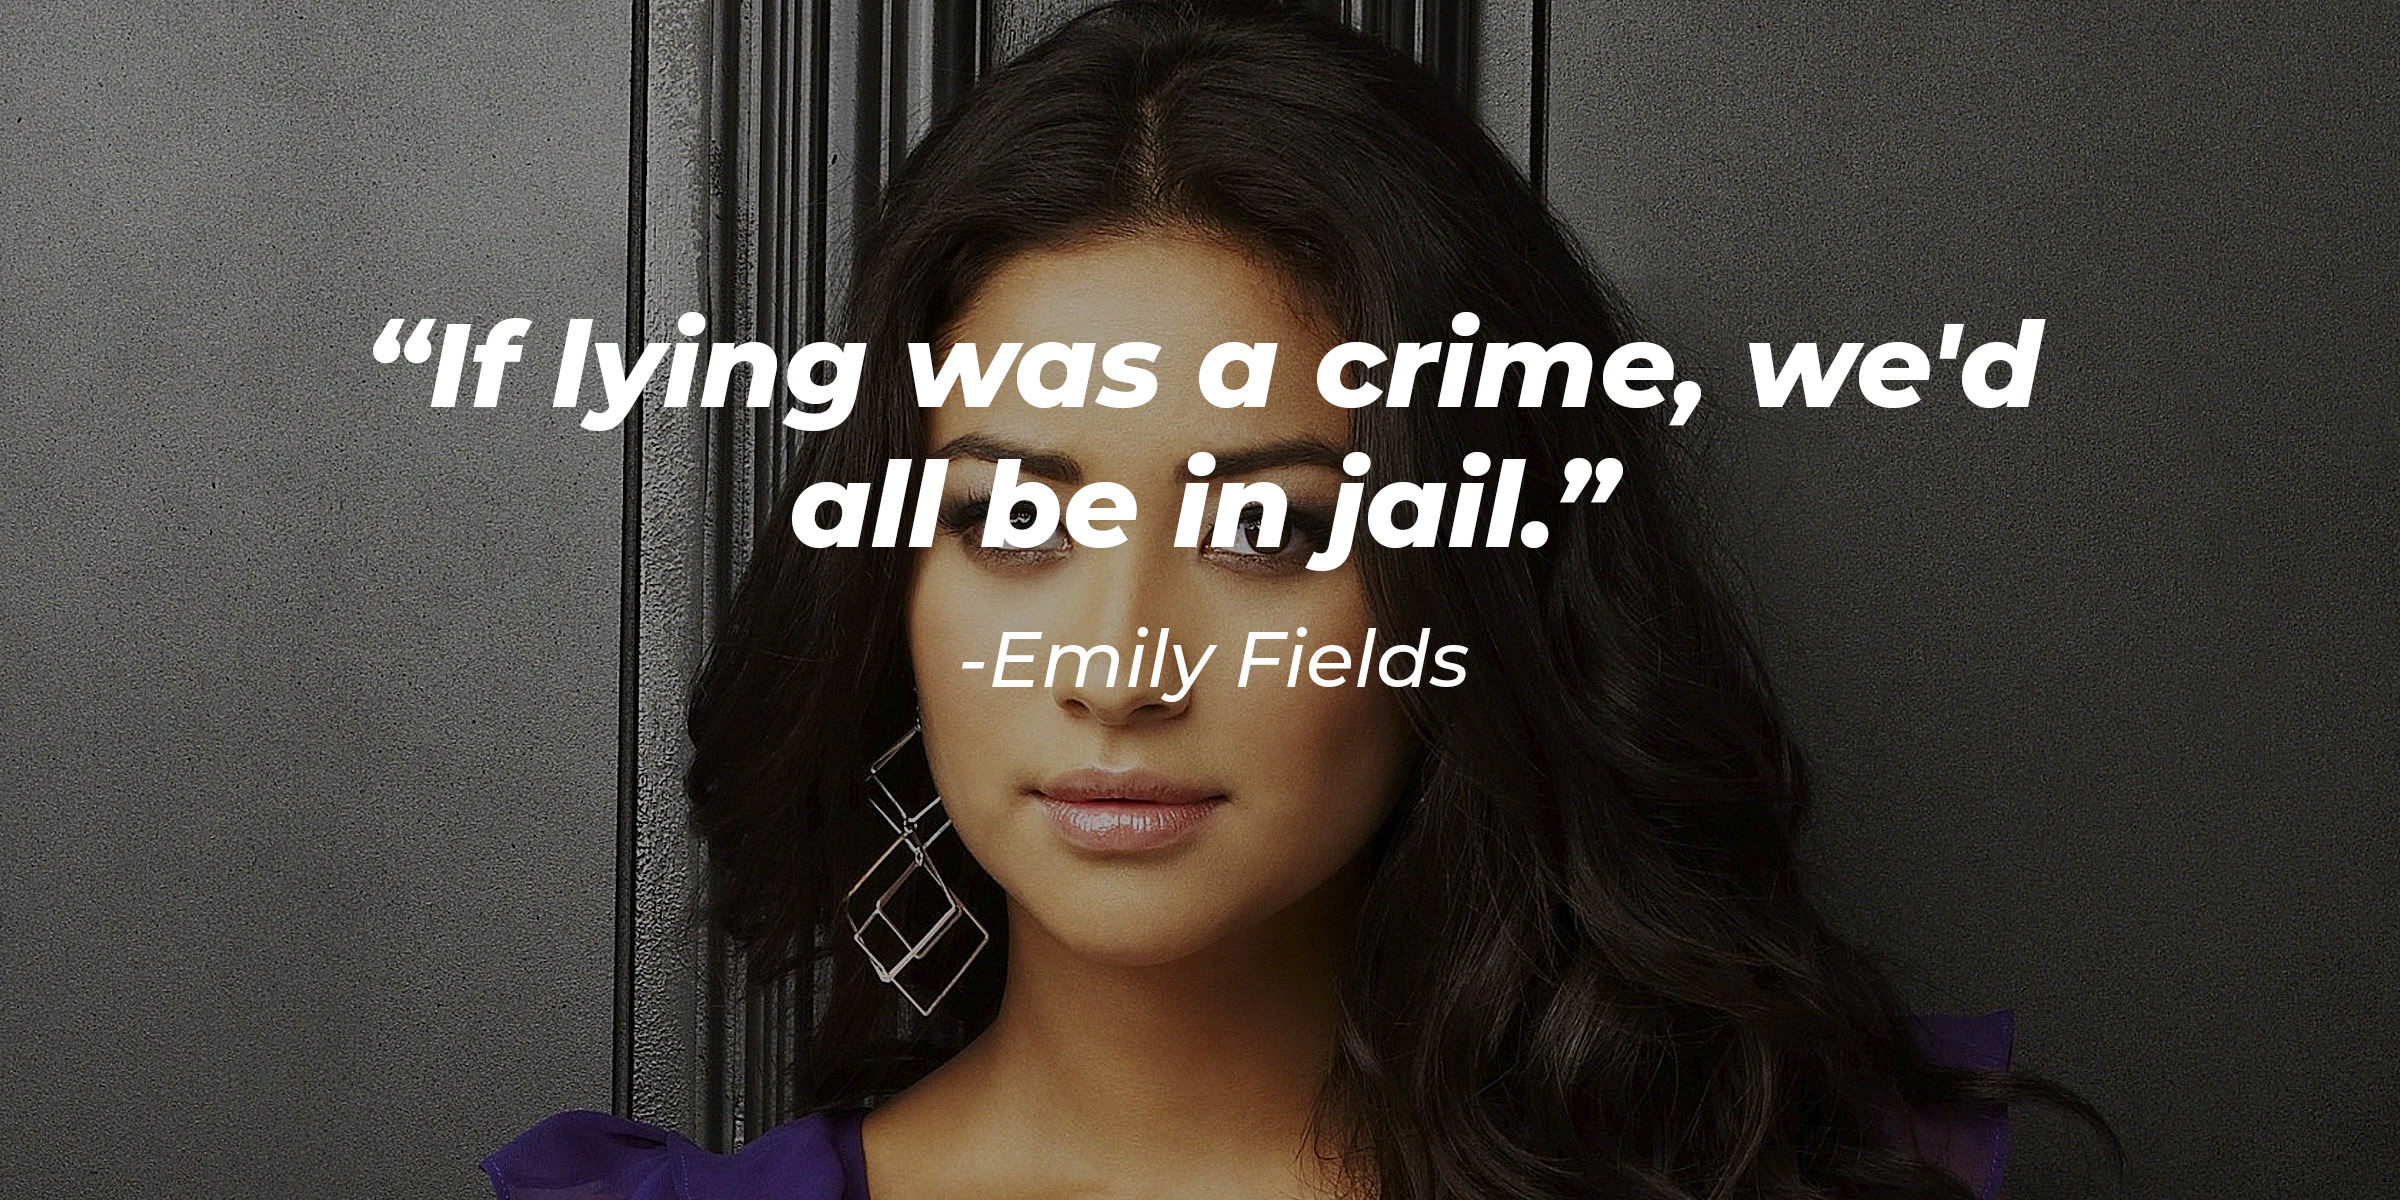 Emily Fields with her quote: "If lying was a crime, we'd all be in jail." | Source: facebook.com/prettylittleliars